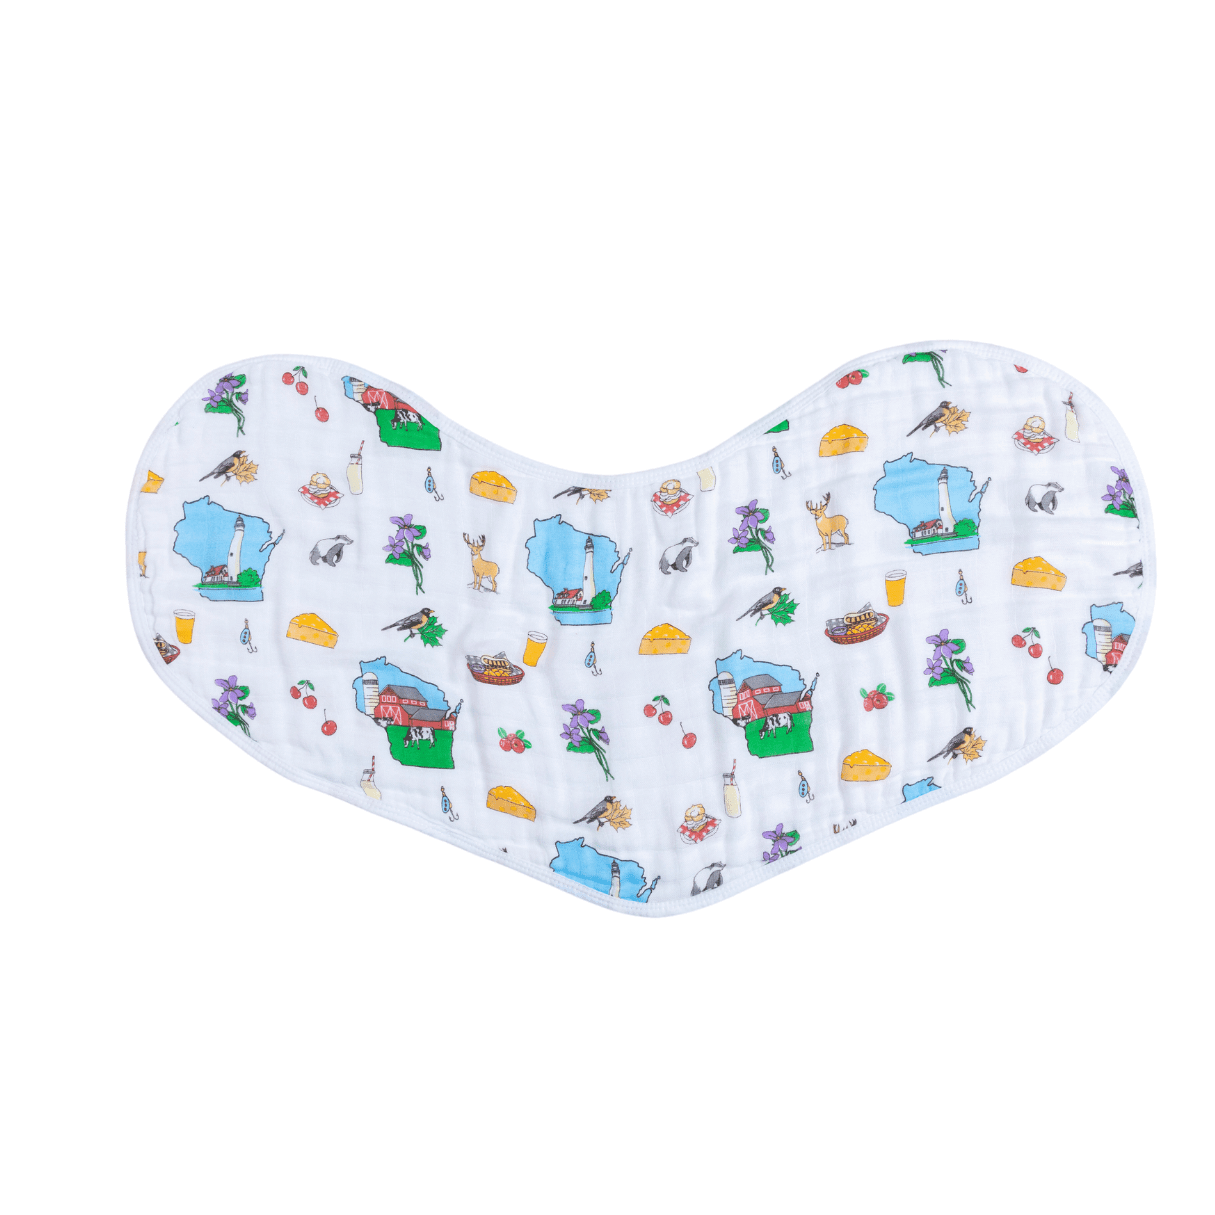 Baby burp cloth and bib set featuring a cute Wisconsin state design with landmarks and icons in pastel colors.